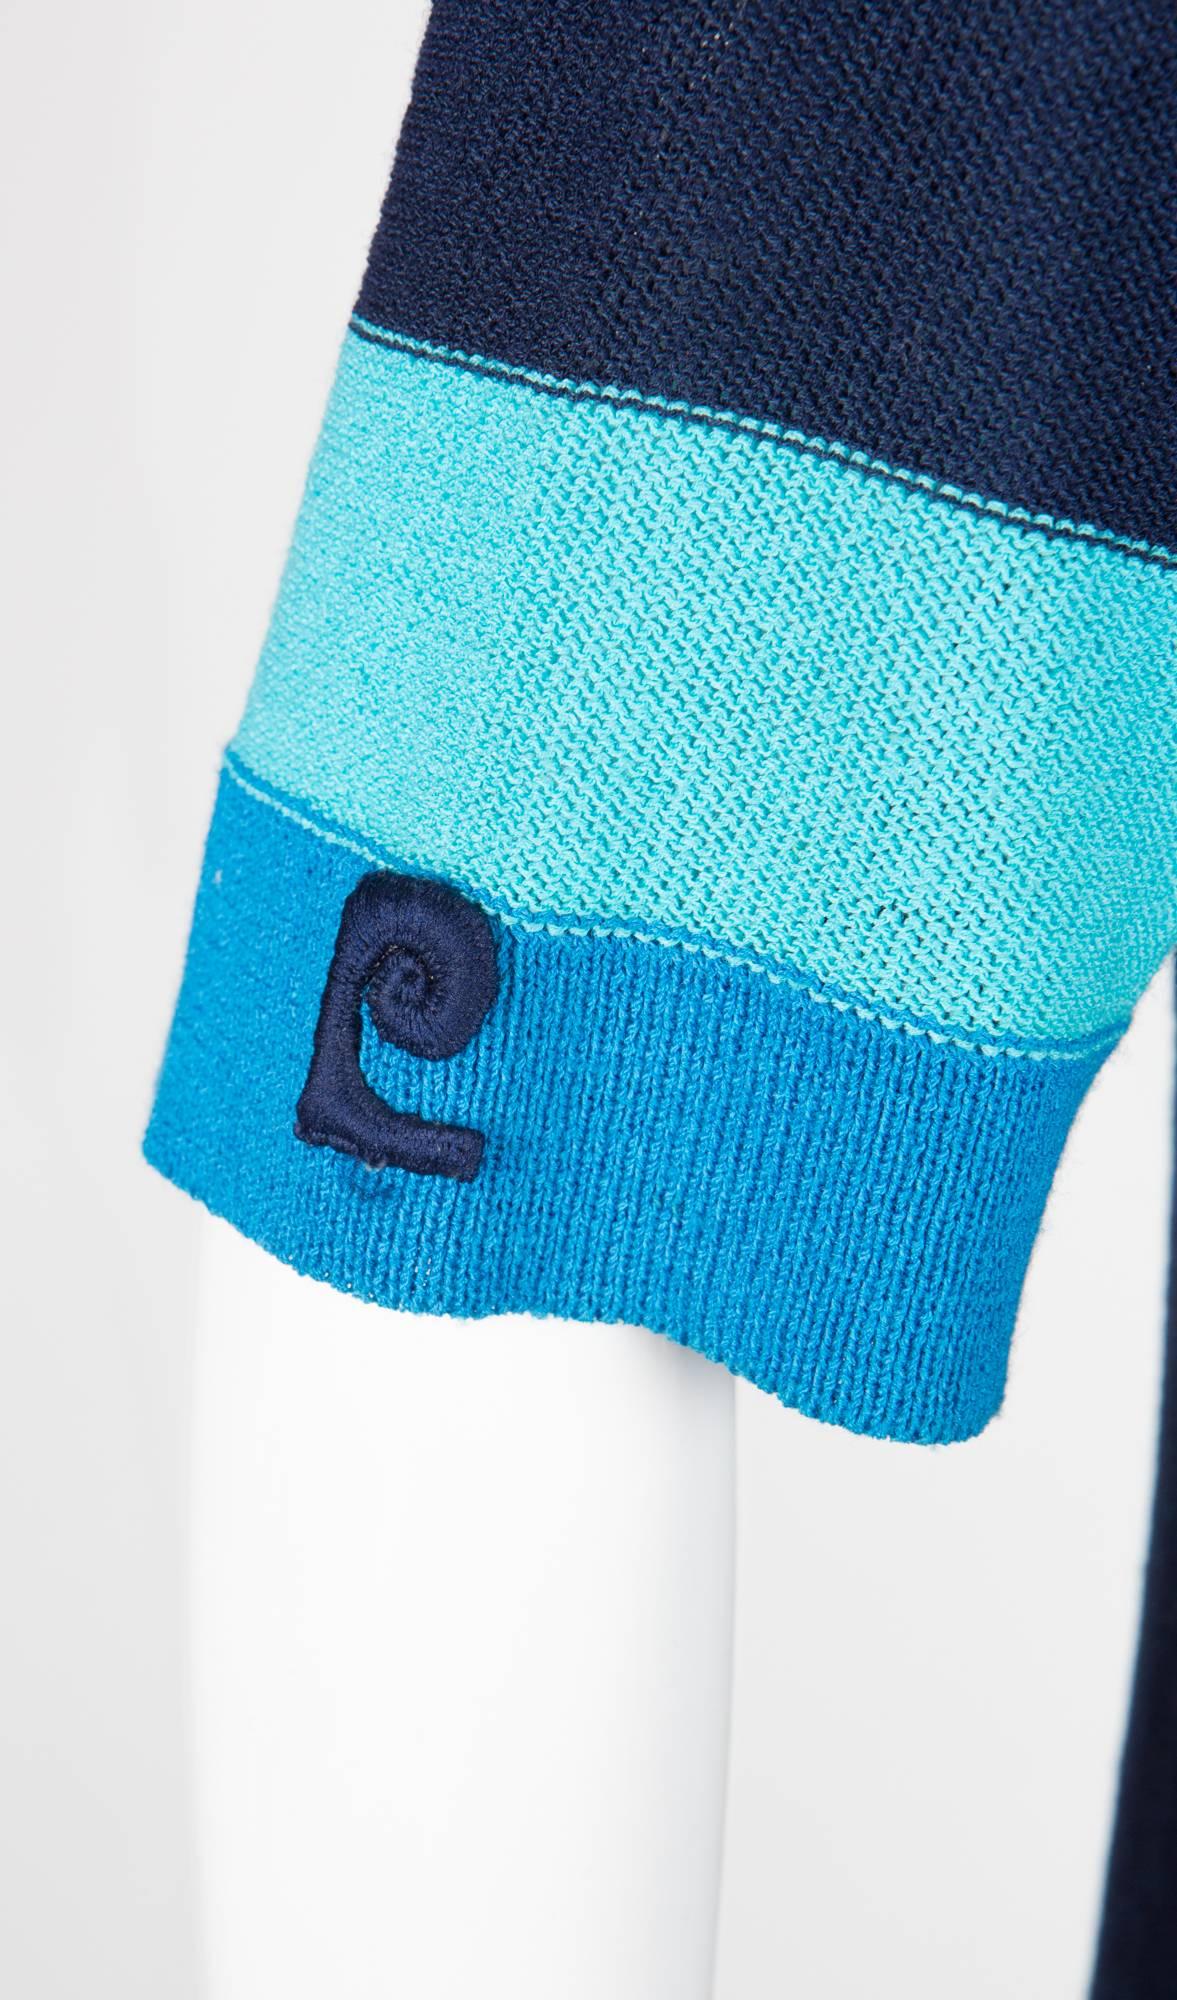 Navy Pierre Cardin crepe knitted dress featuring a reverse jersey knitting,  blue and turquoise band, an A line, a sleeve famous logo.
In good vintage condition. Made in France.
Estimated size 40fr/42fr // US8/10 // UK1/12/14
We guarantee you will